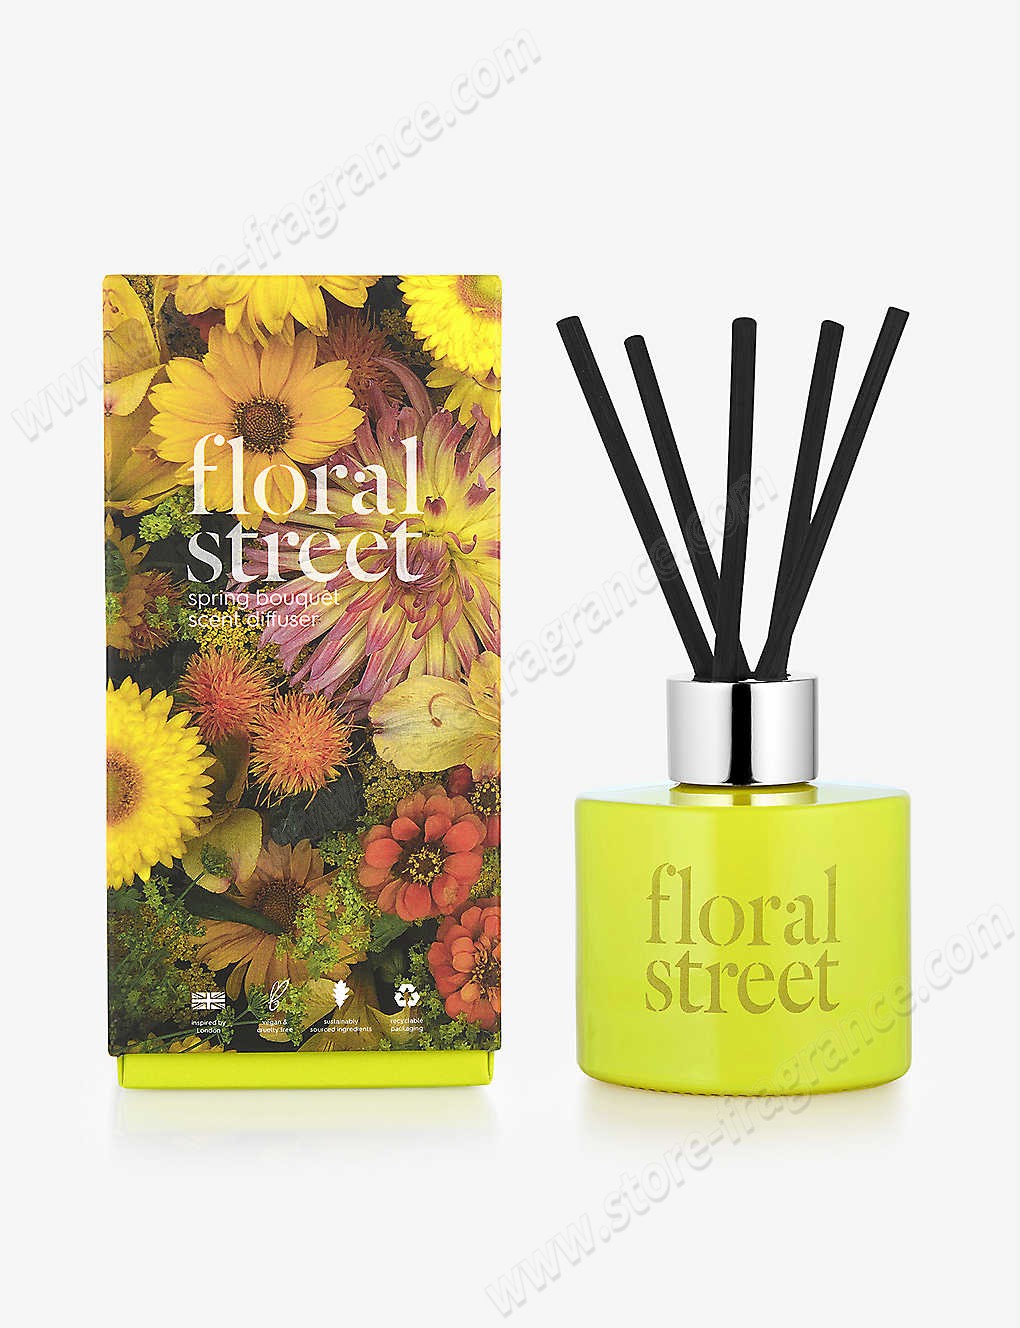 FLORAL STREET/Spring Bouquet diffuser 100ml Limit Offer - -1